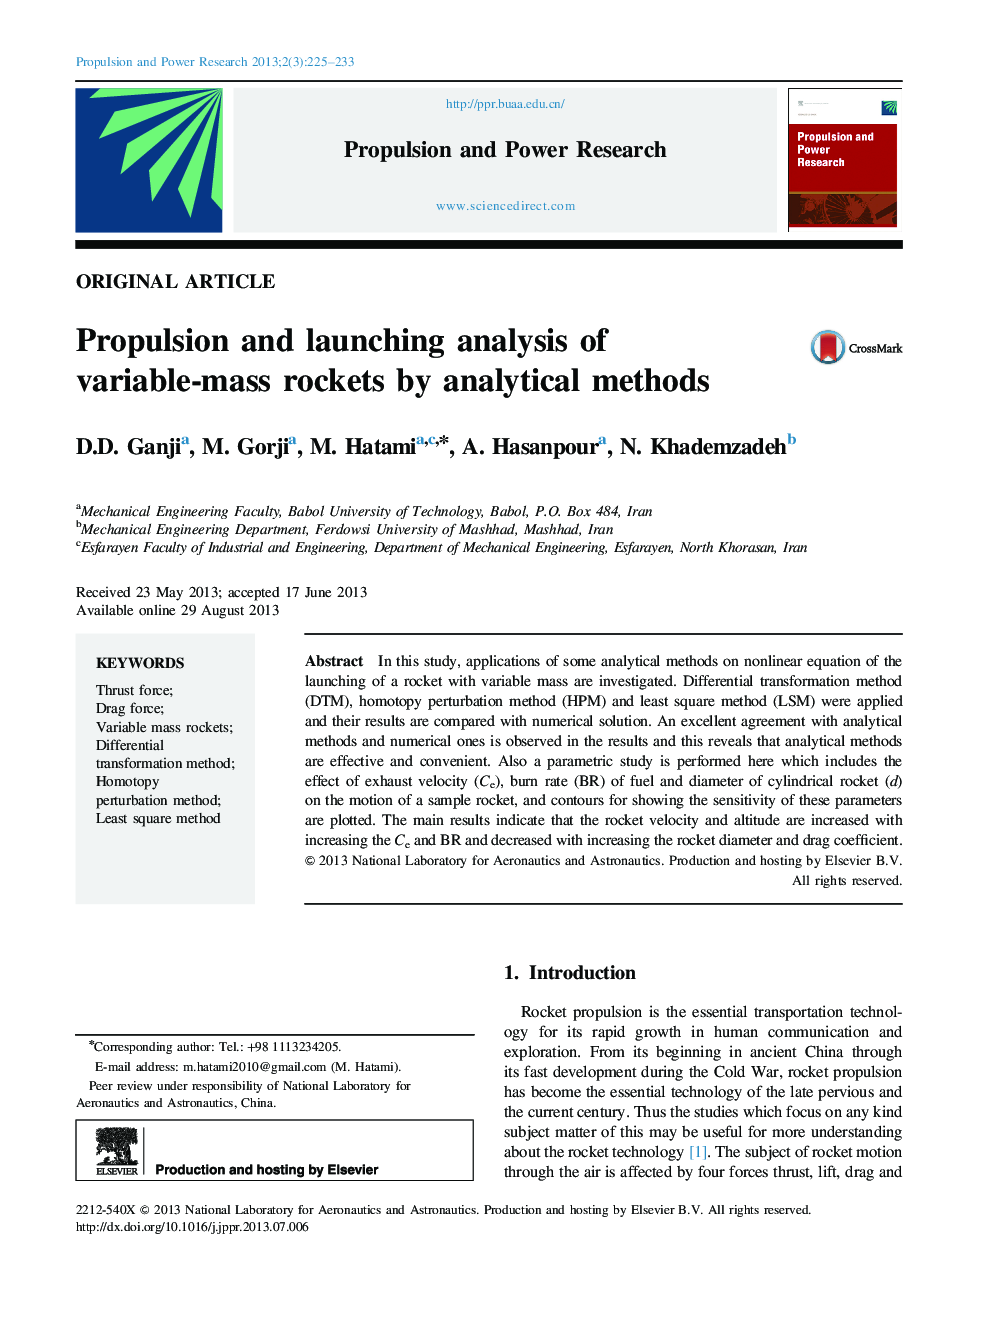 Propulsion and launching analysis of variable-mass rockets by analytical methods 